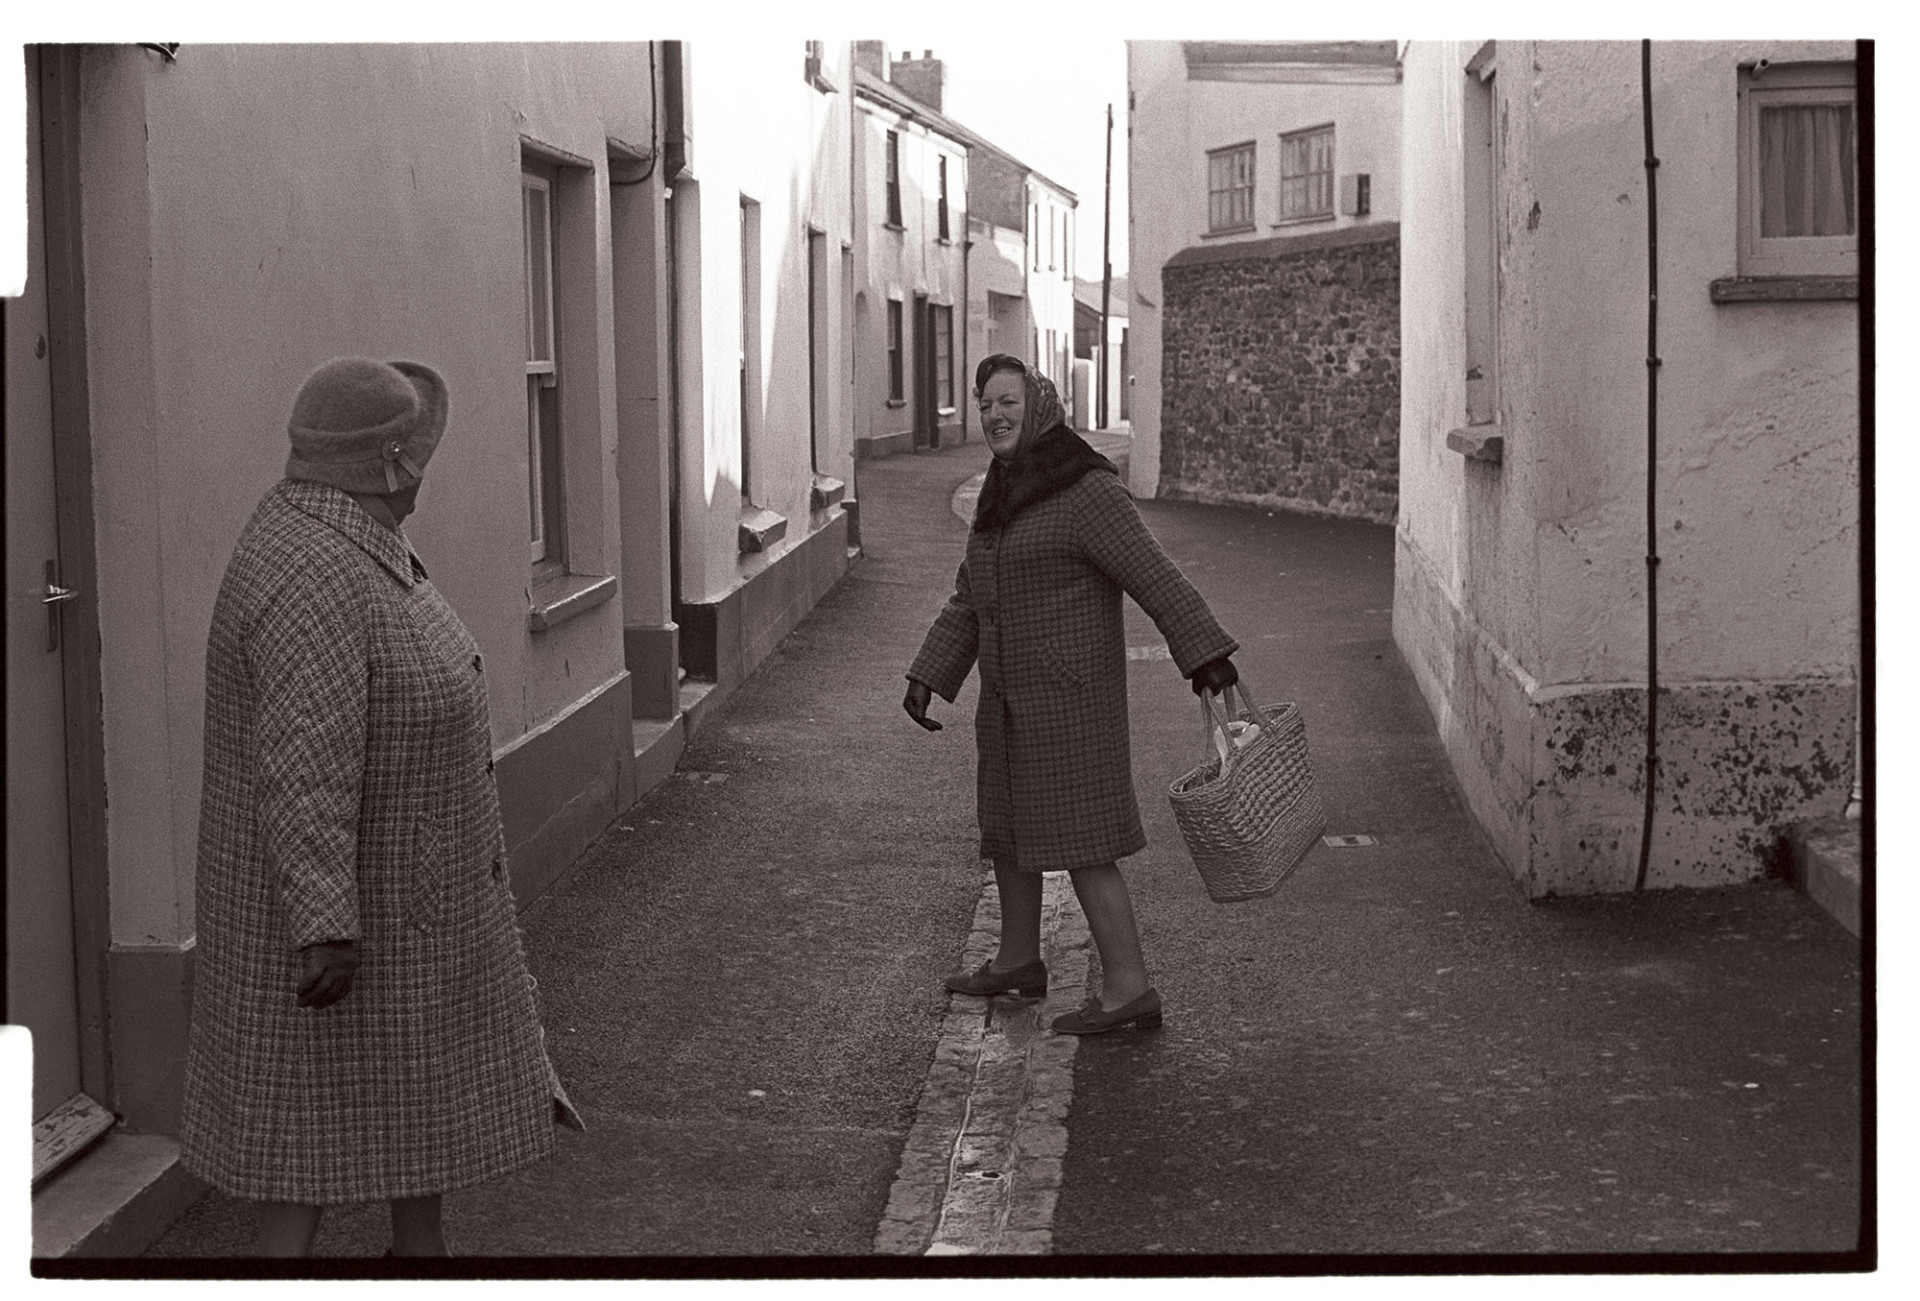 Street scene, two women chatting.
[Two women, one with a shopping bag, chatting in a narrow street in Appledore.]